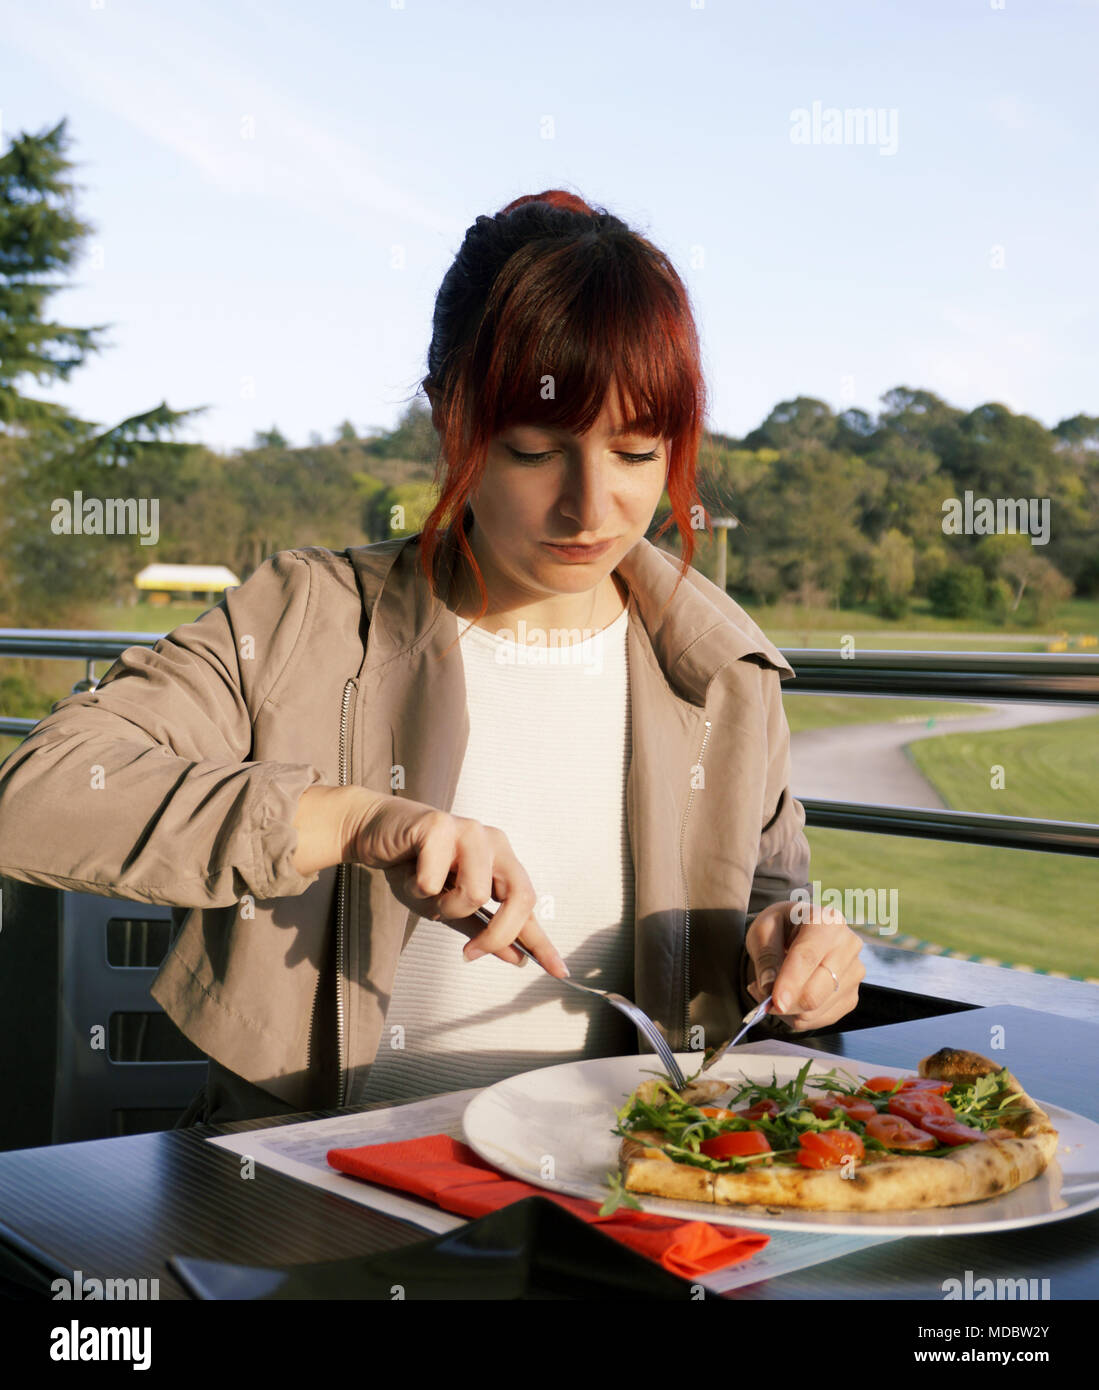 Redhead young woman eating pizza with fork and knife in the restaurant. Portrait of a young nice woman eating alone outside Stock Photo